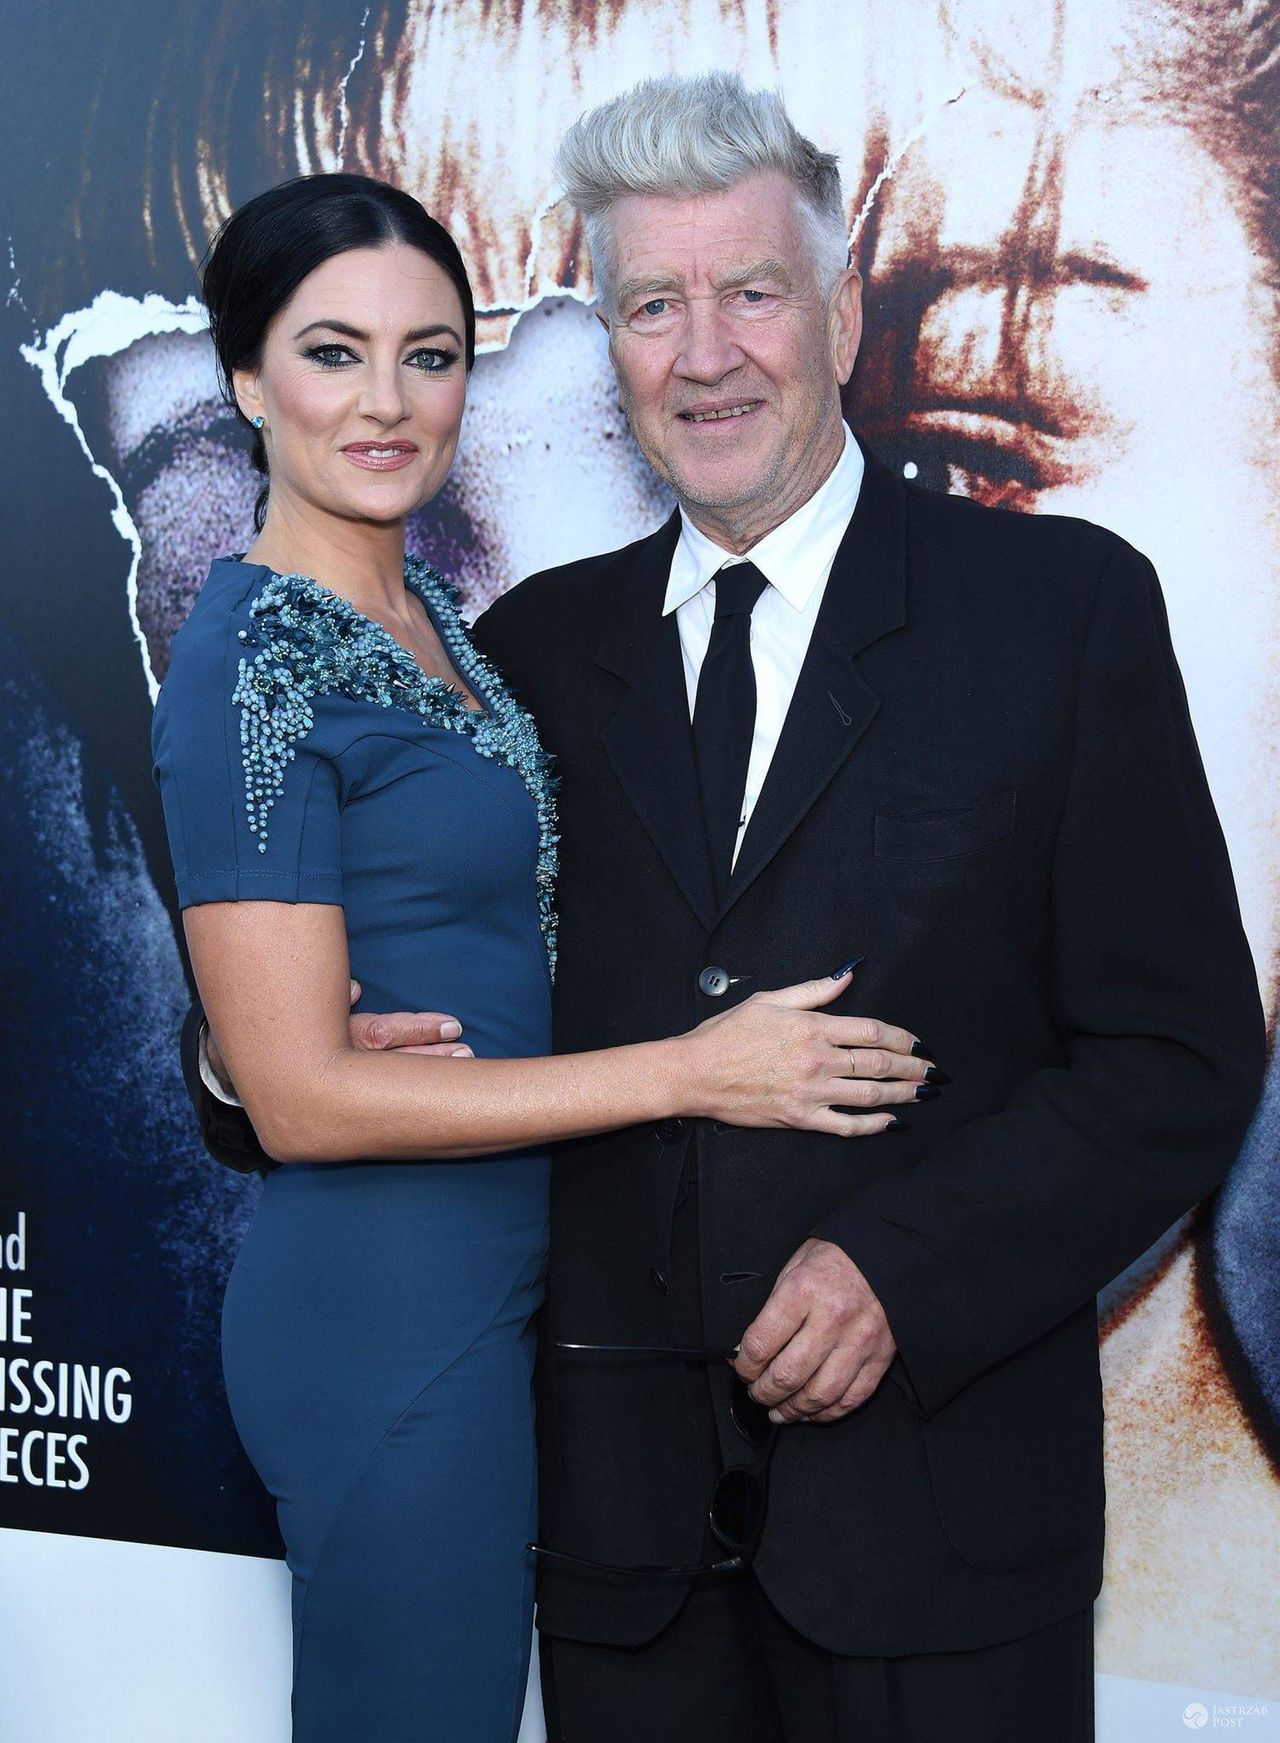 July 16, 2014  Hollywood, CA.
Madchen Amick & David Lynch
"Twin Peaks - The Entire Mystery" Blu-ray Premiere
at the Vista Theatre
© Chase Rollins / AFF-USA.COM